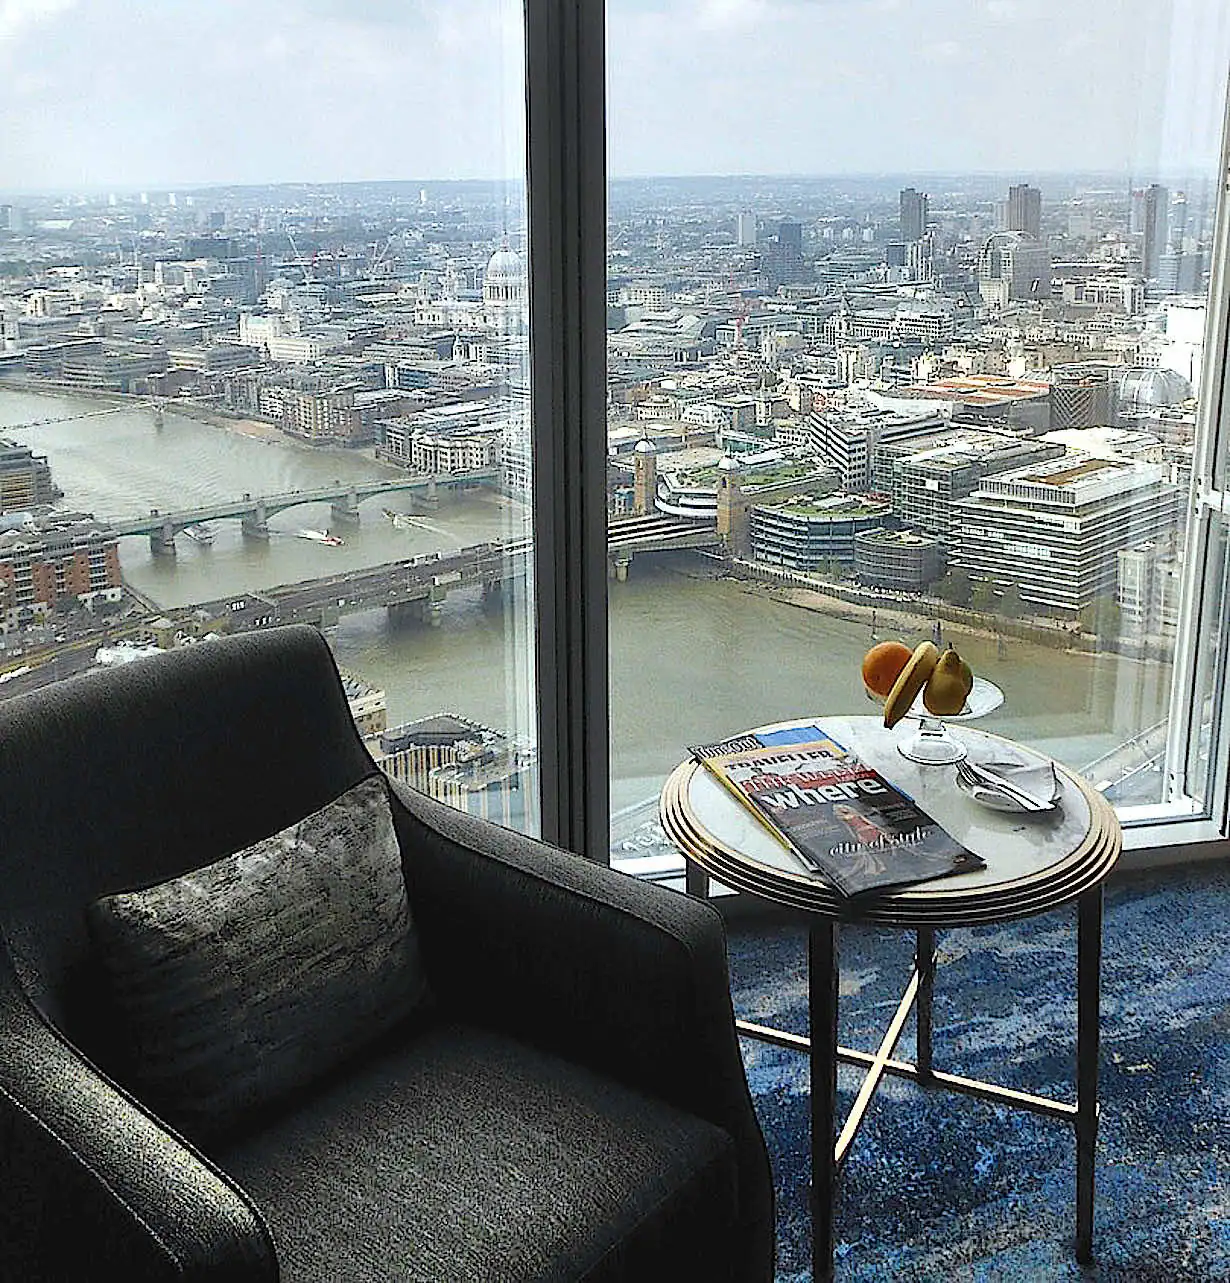 London’s skyline from a ‘City View’ room